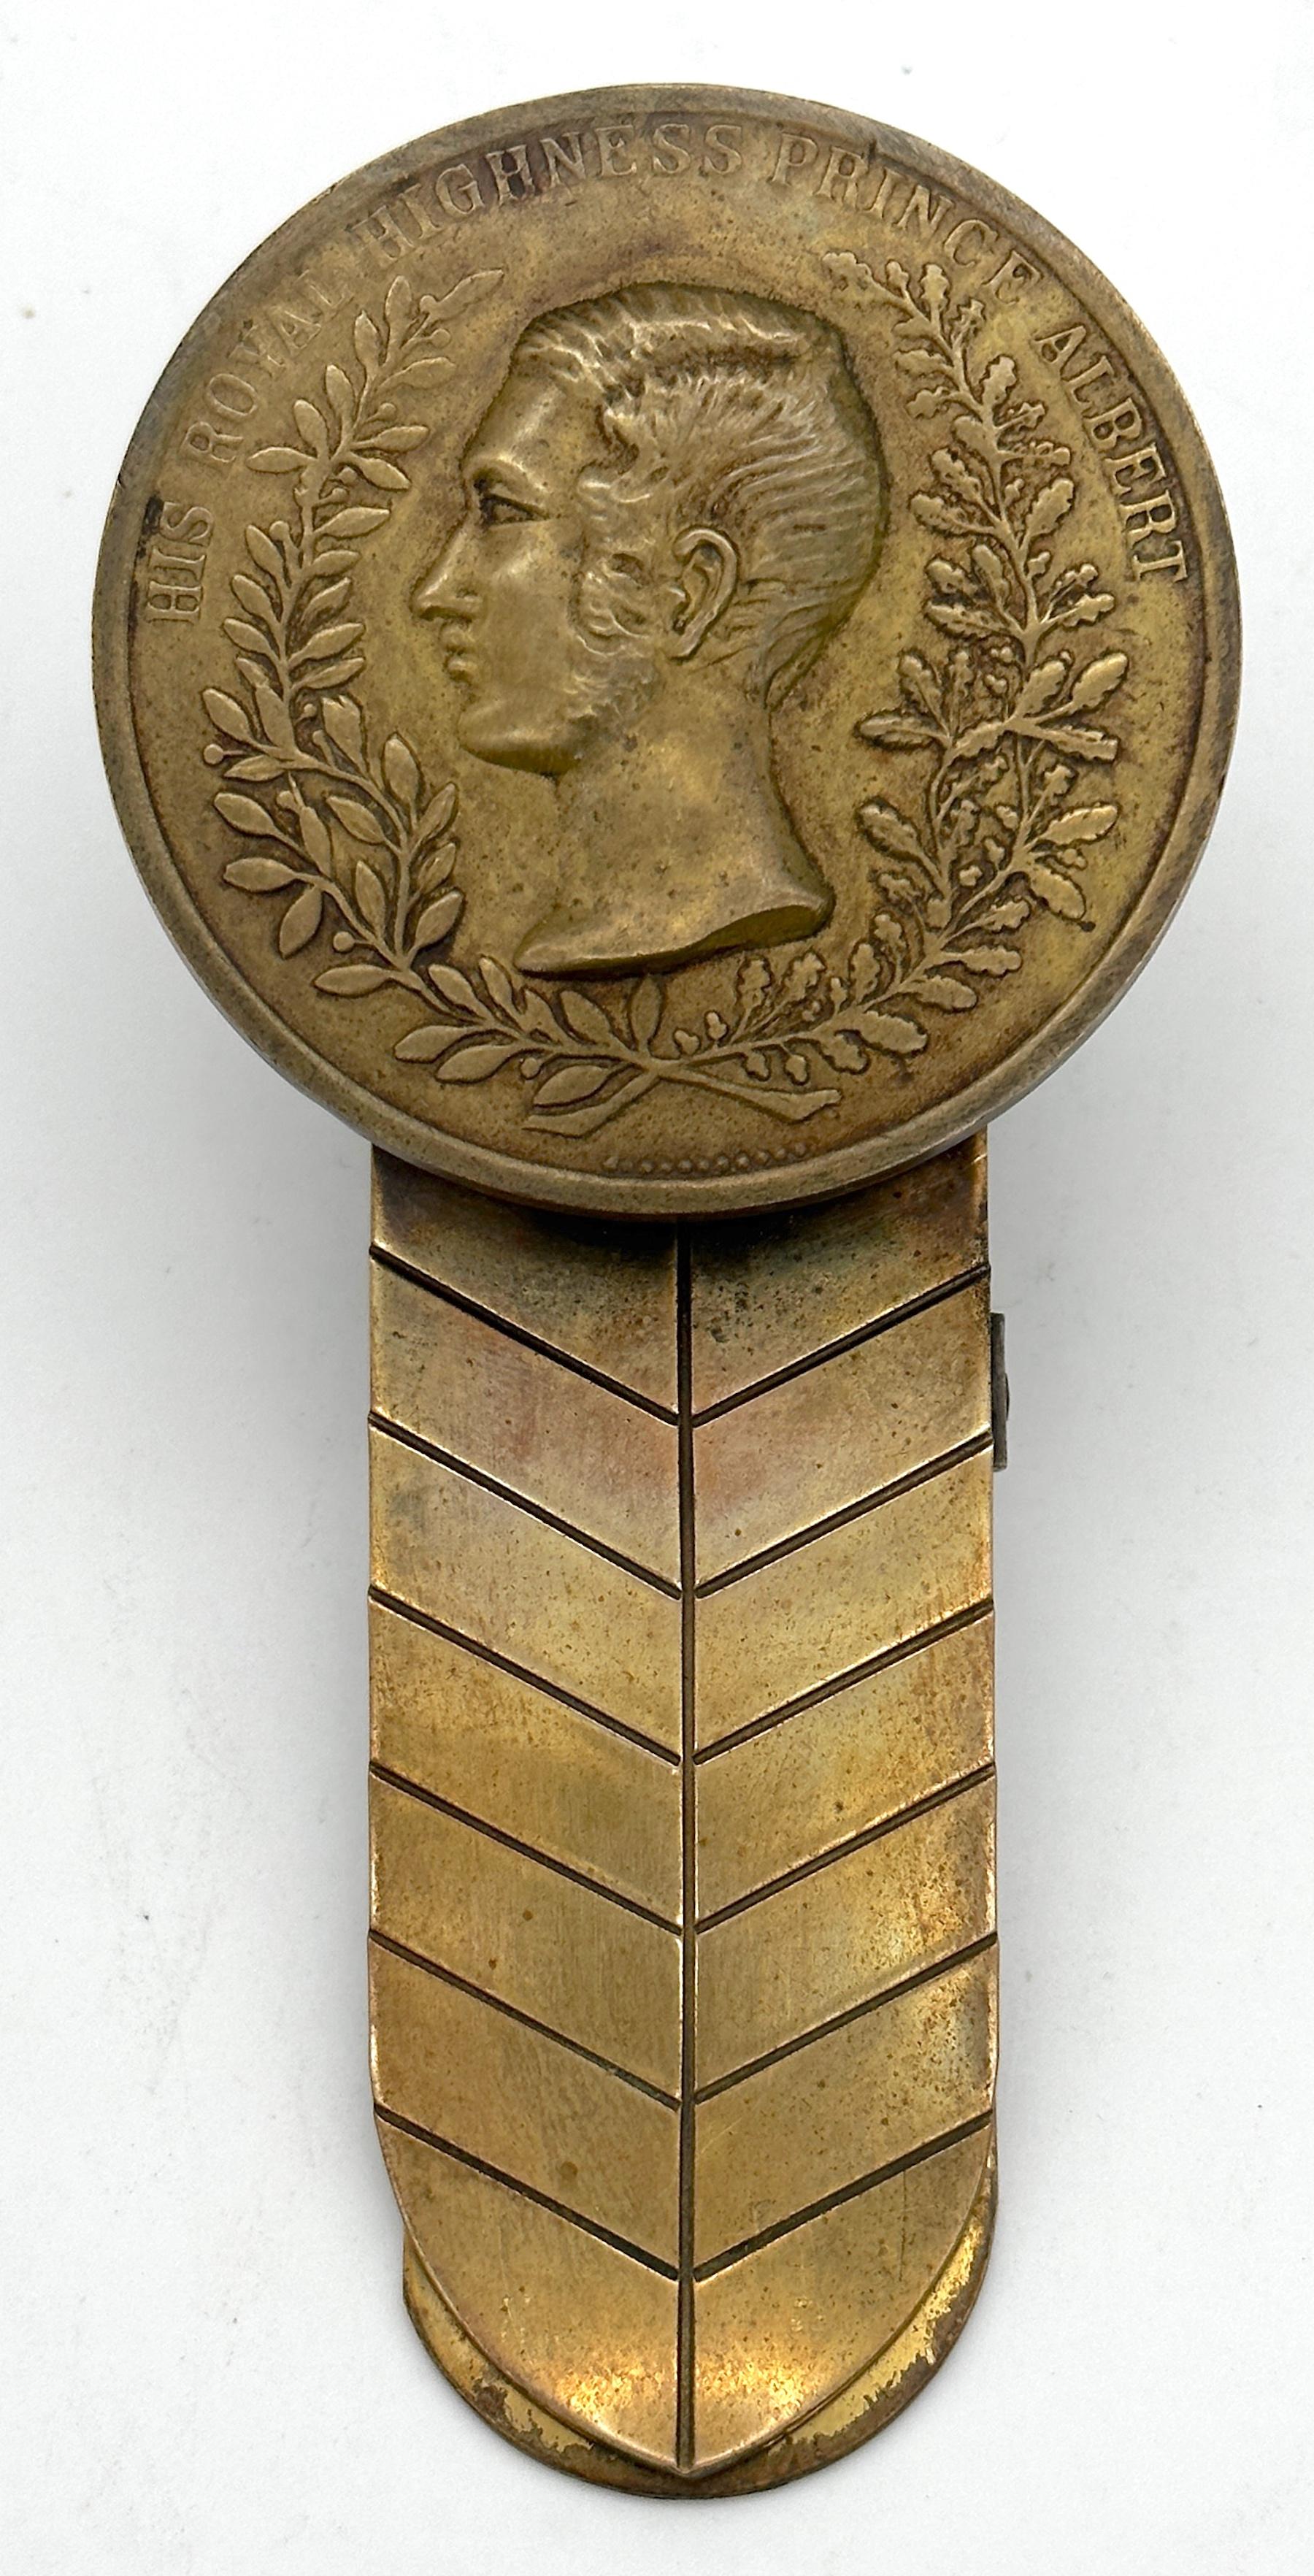 English Bronze 'His Royal Highness Prince Albert' Commemorative Desk Clip
England, early 20th century

A distinguished English bronze 'His Royal Highness Prince Albert' Commemorative Desk Clip dating back to the early 20th century. The